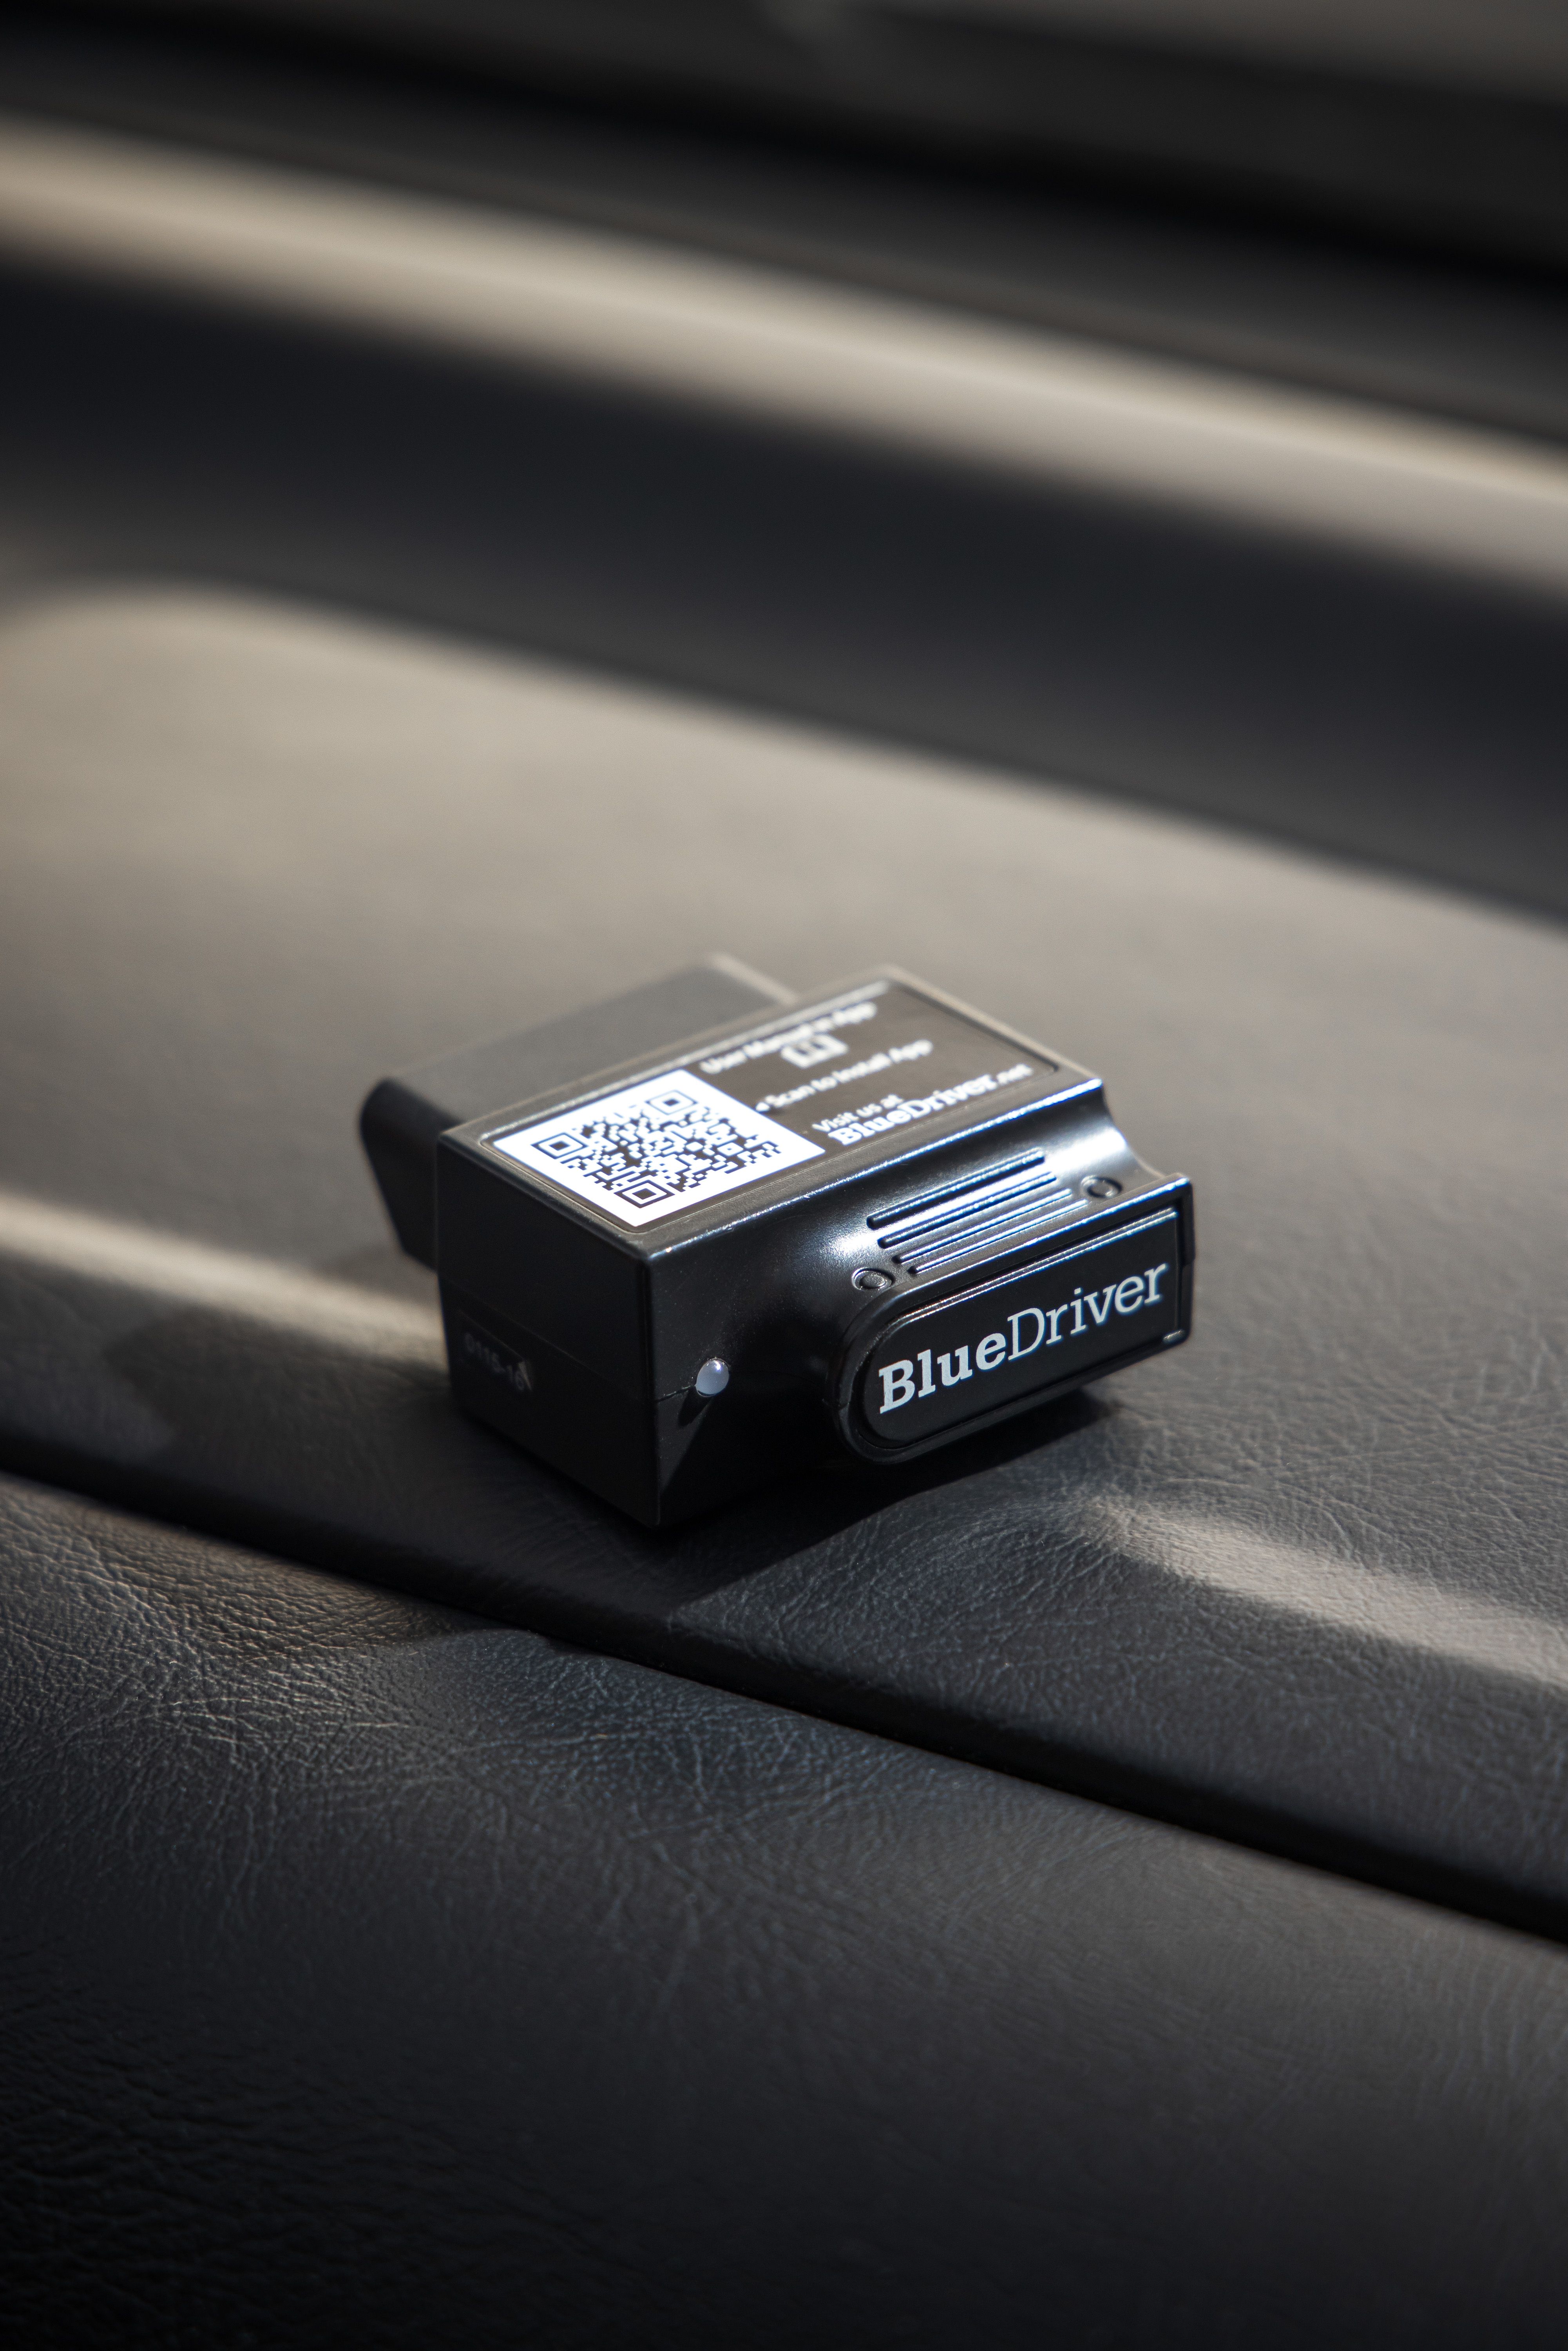 OBD2 Wireless Car Scanner - Not sold in stores